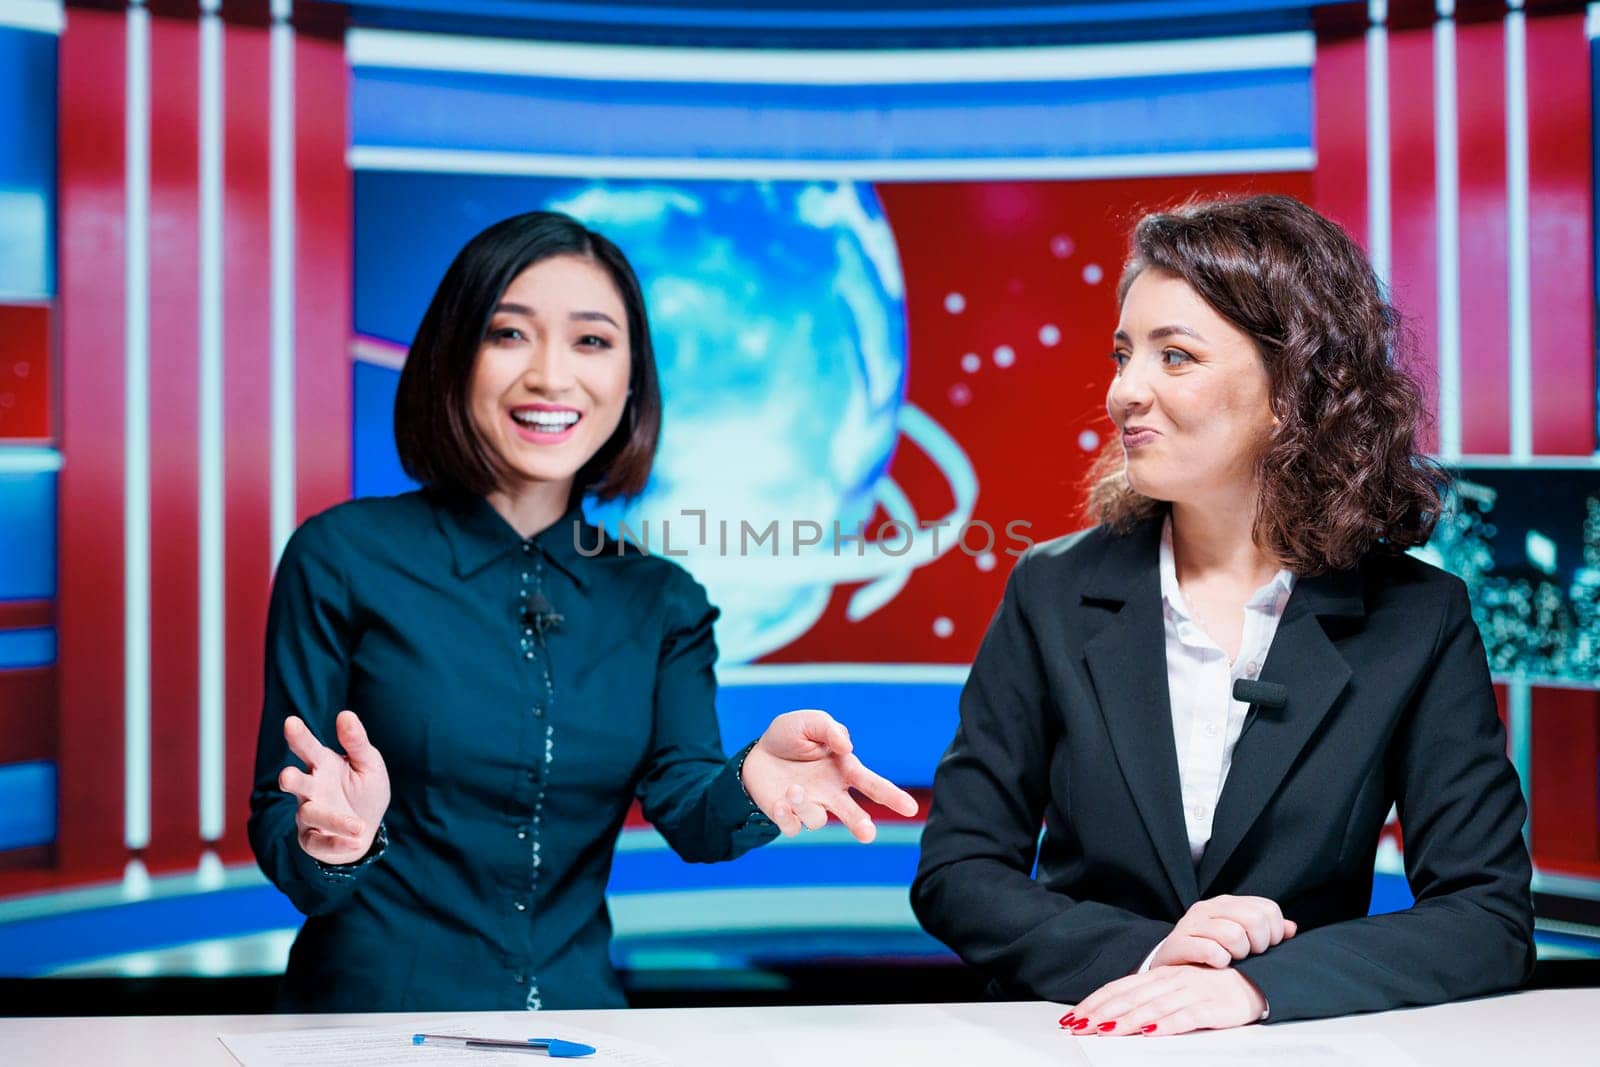 Morning show hosts debate events, presenting latest news on international television network in newsroom. Tewo colleagues working on entertainment segment newscast doing reportage.